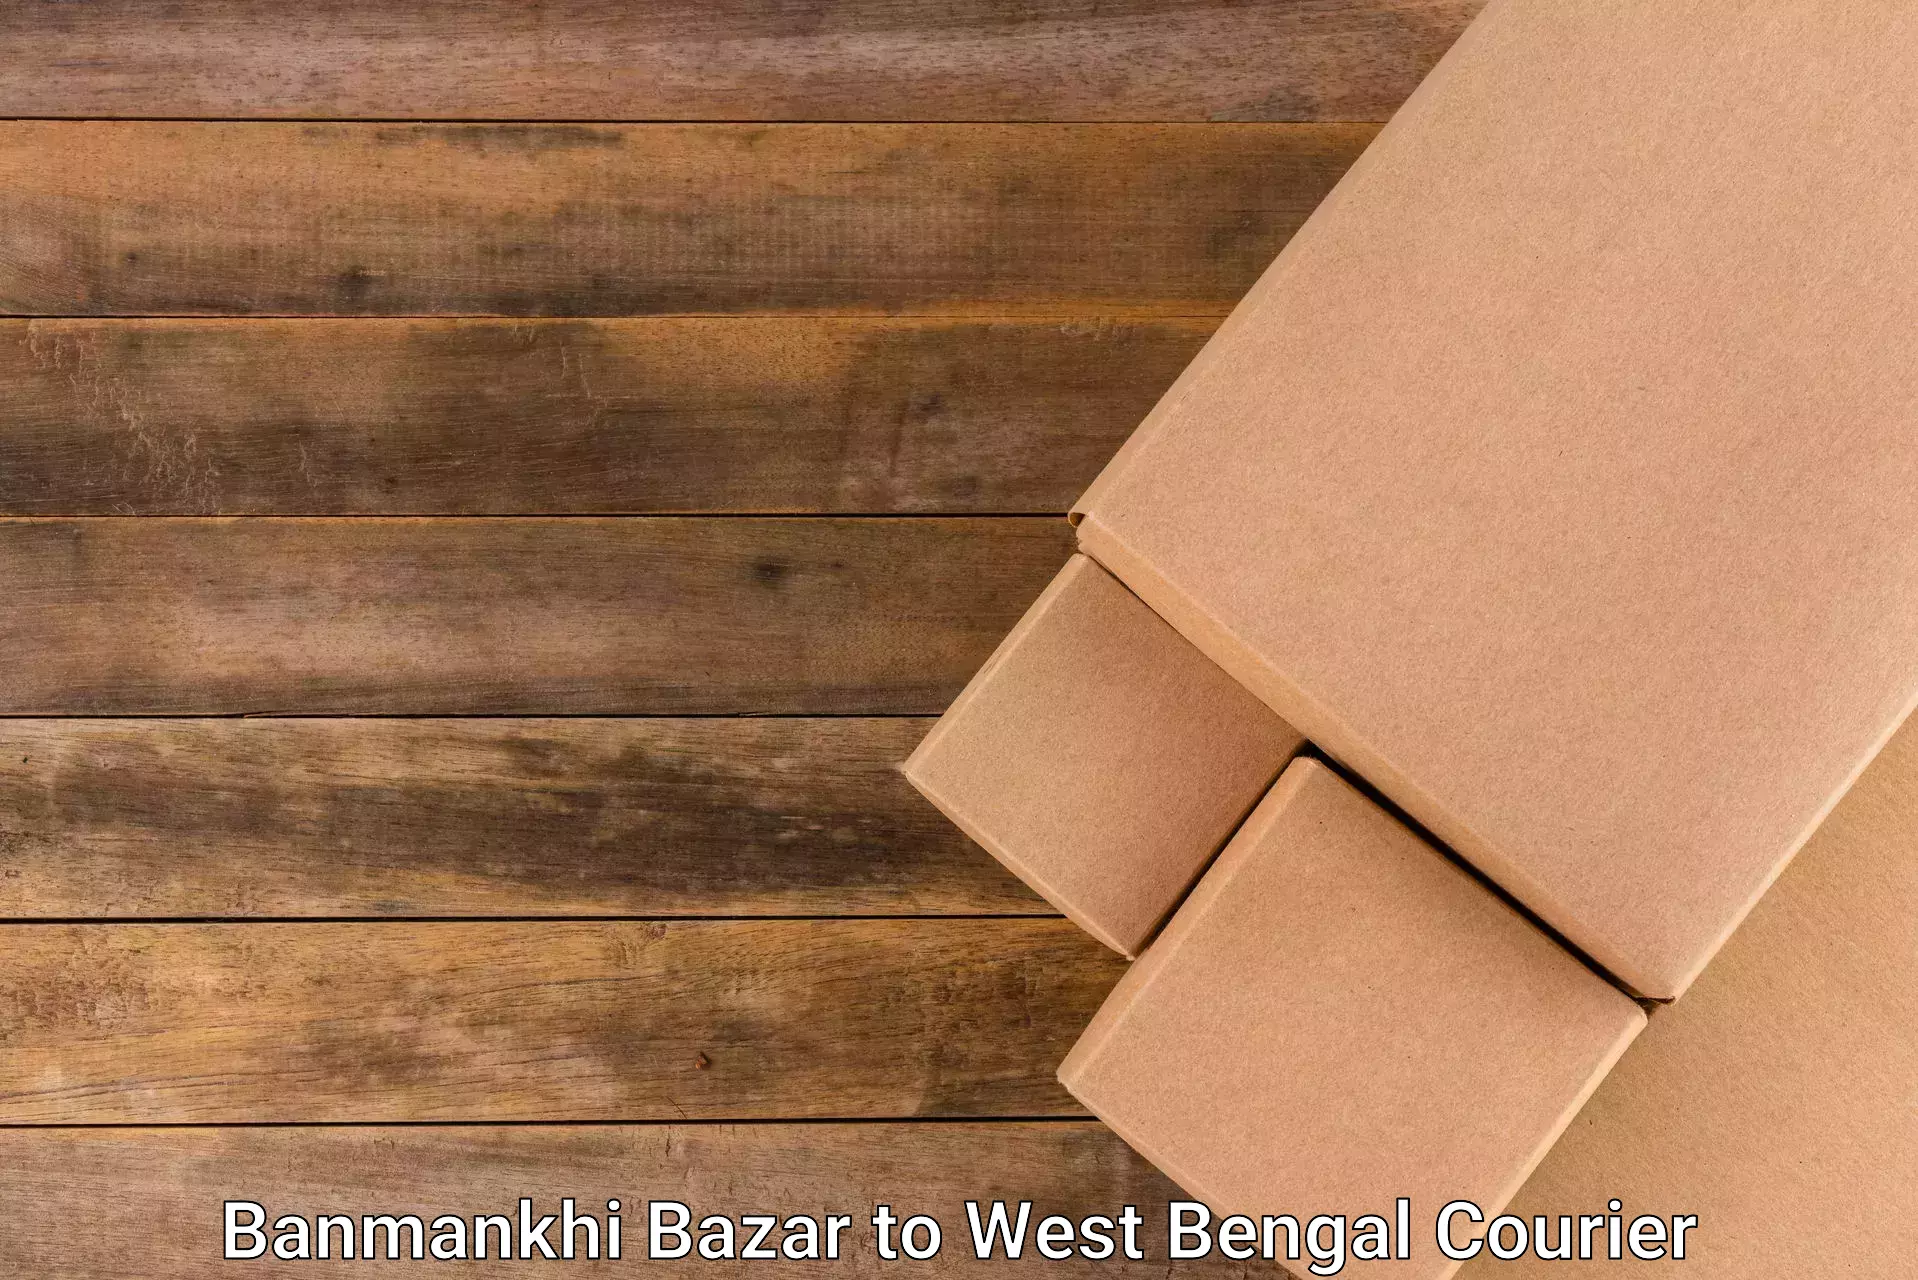 Medical delivery services Banmankhi Bazar to Ennore